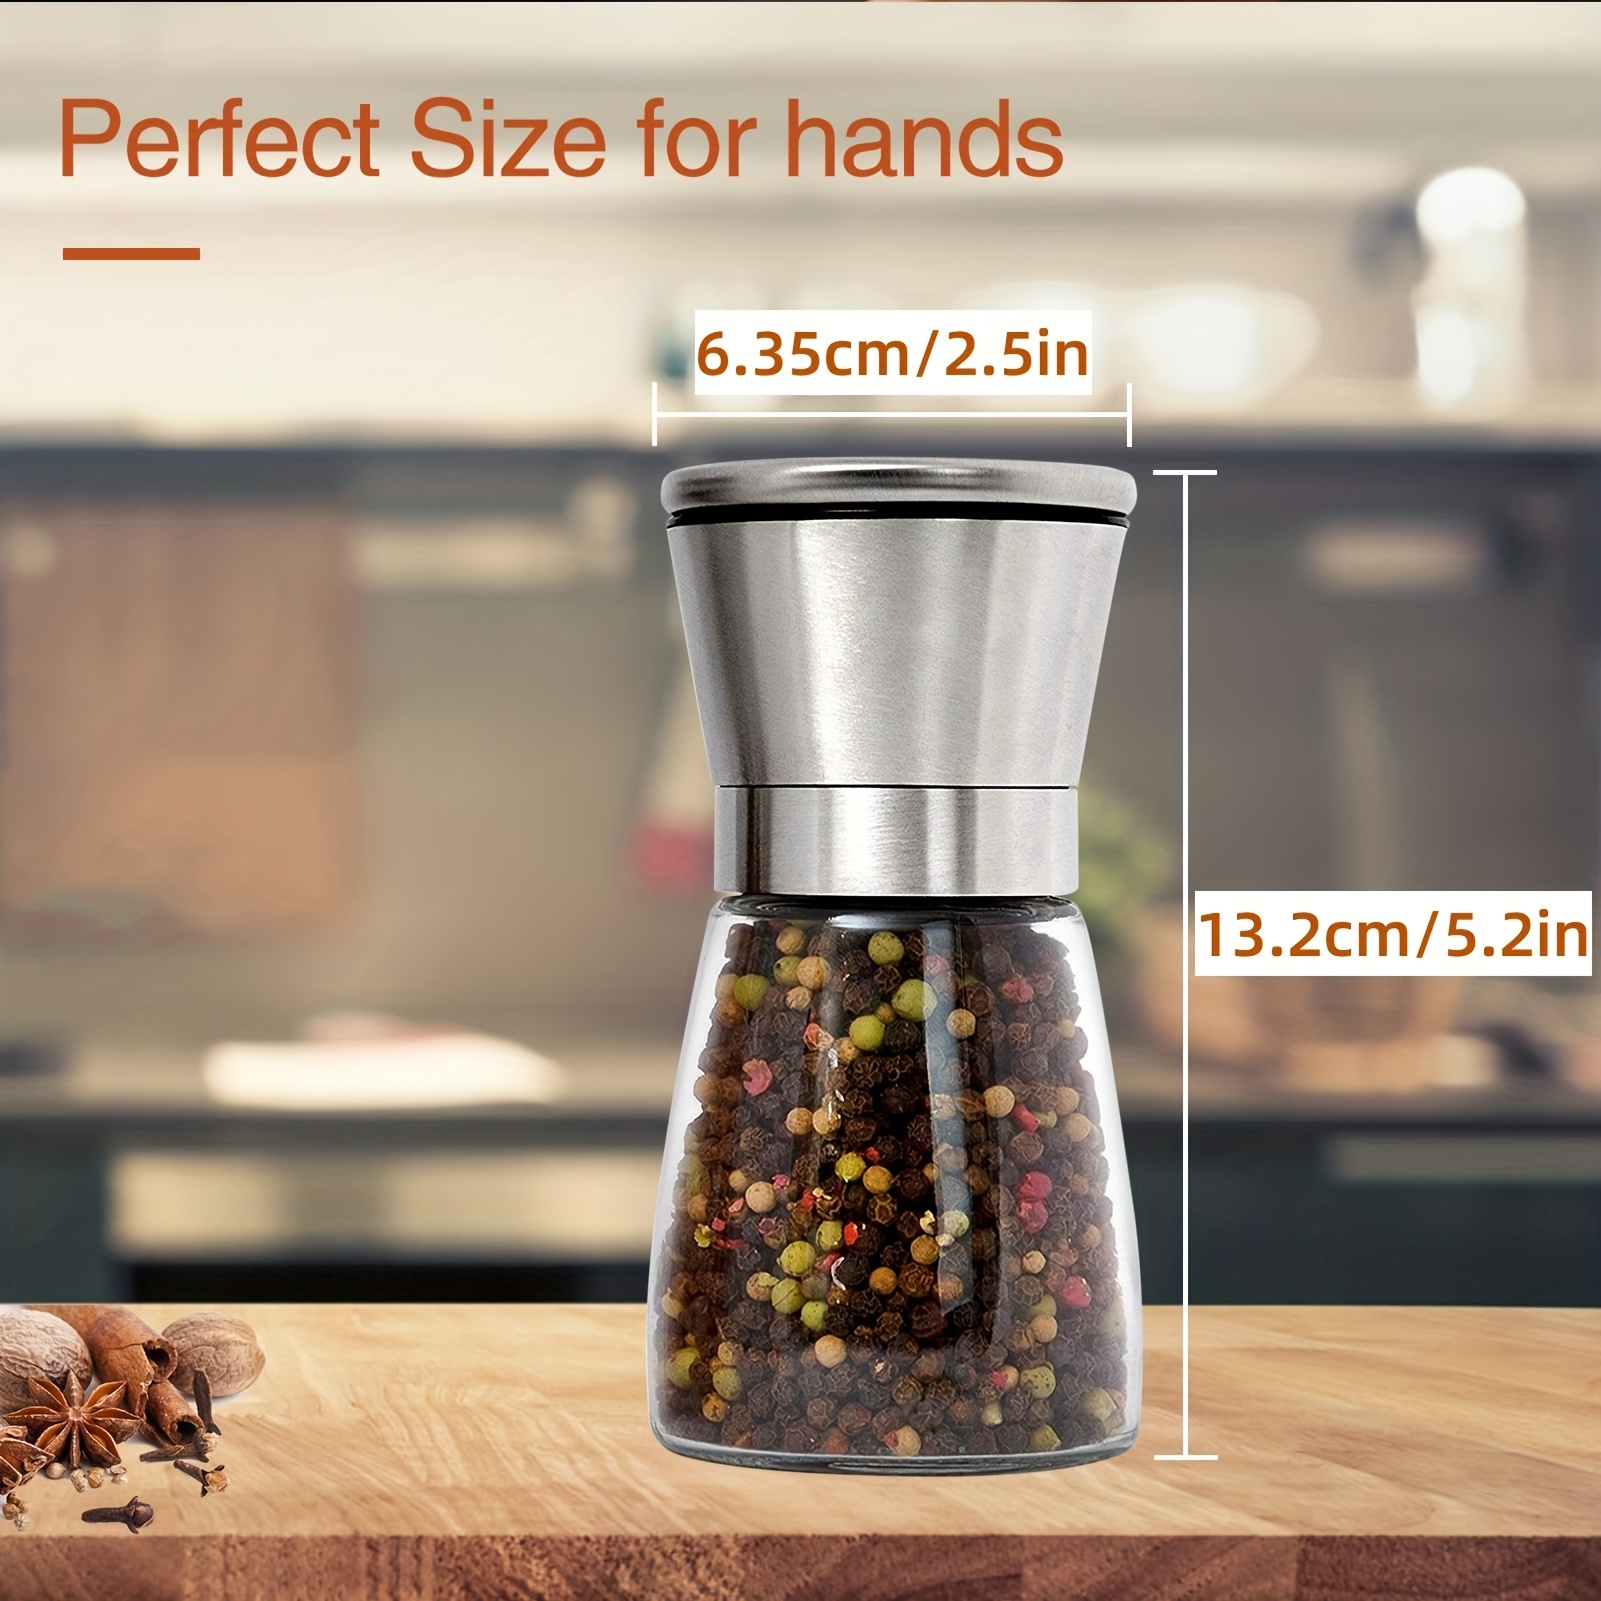 1pc Multifunctional Stainless Steel Electric Pepper Grinder